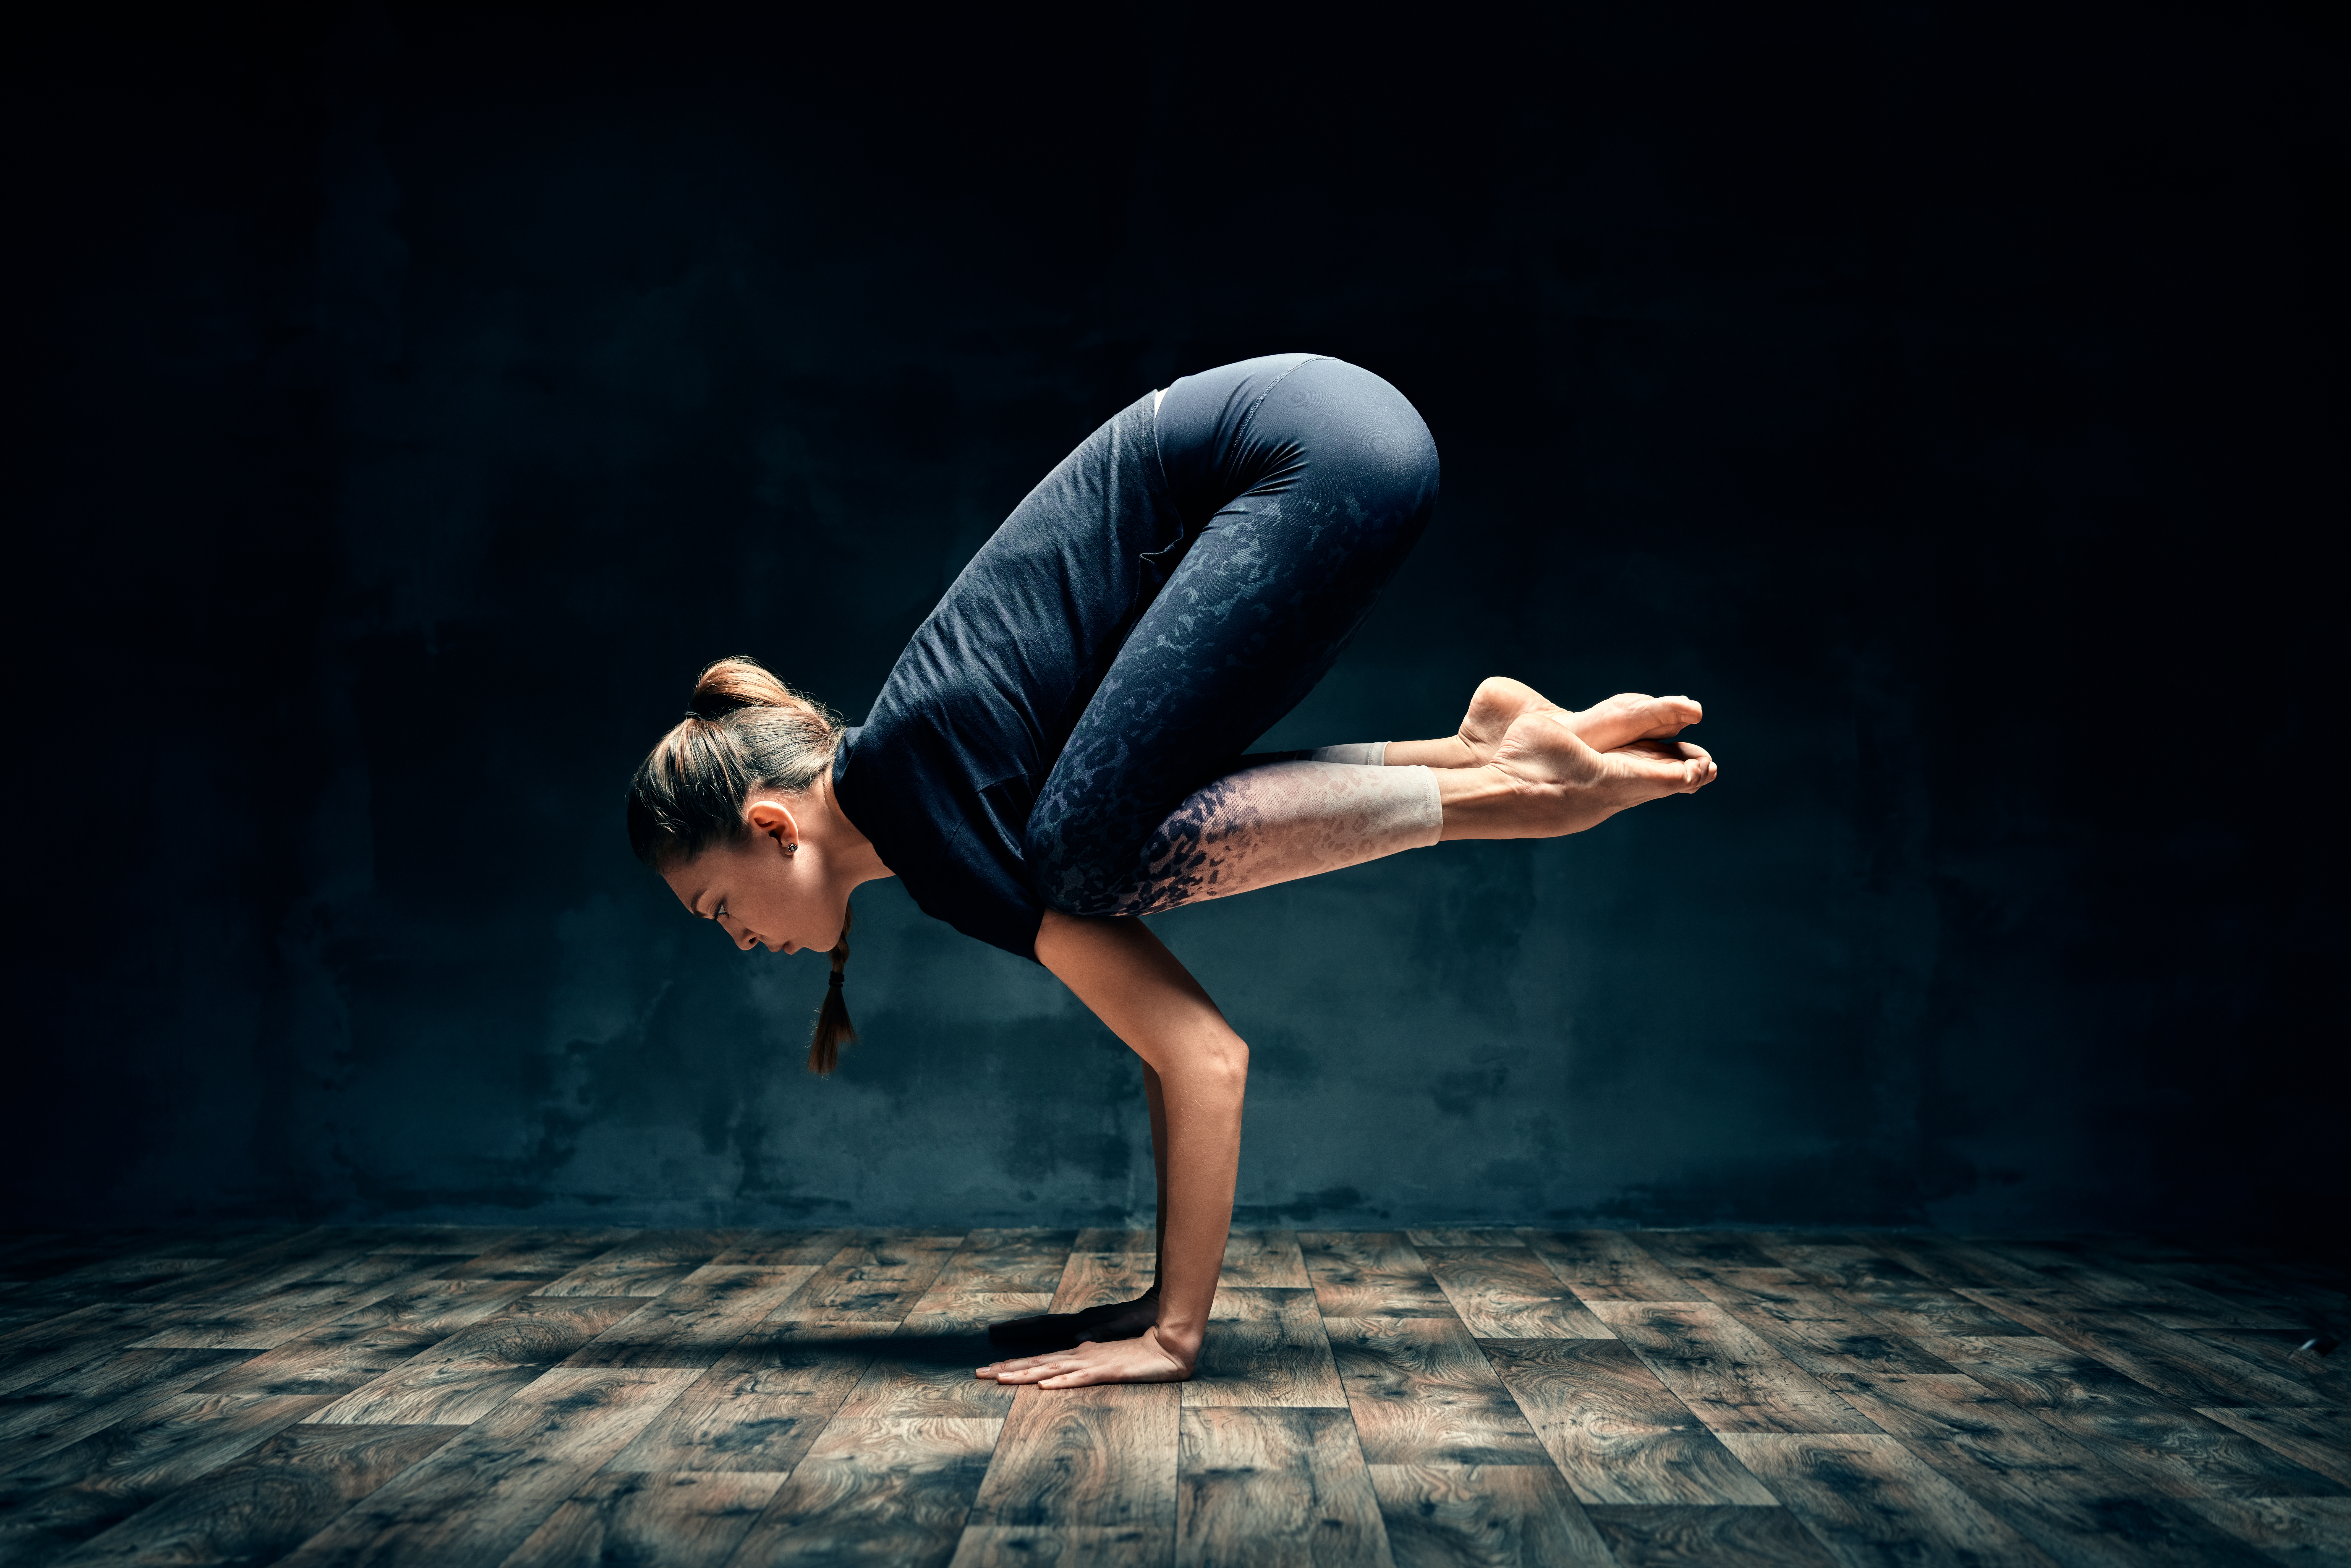 Experience more than 226 hard yoga poses